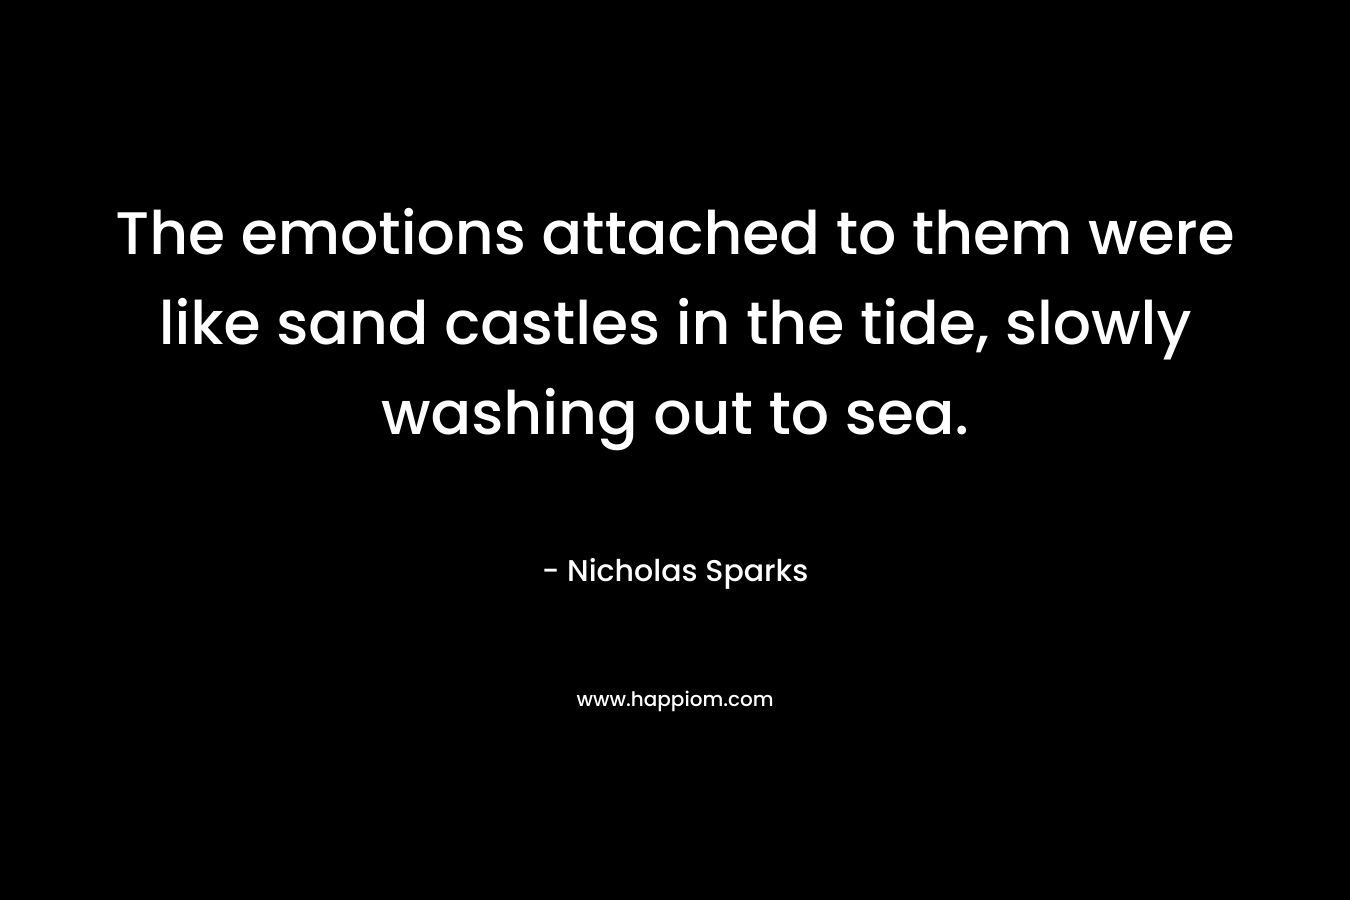 The emotions attached to them were like sand castles in the tide, slowly washing out to sea. – Nicholas Sparks